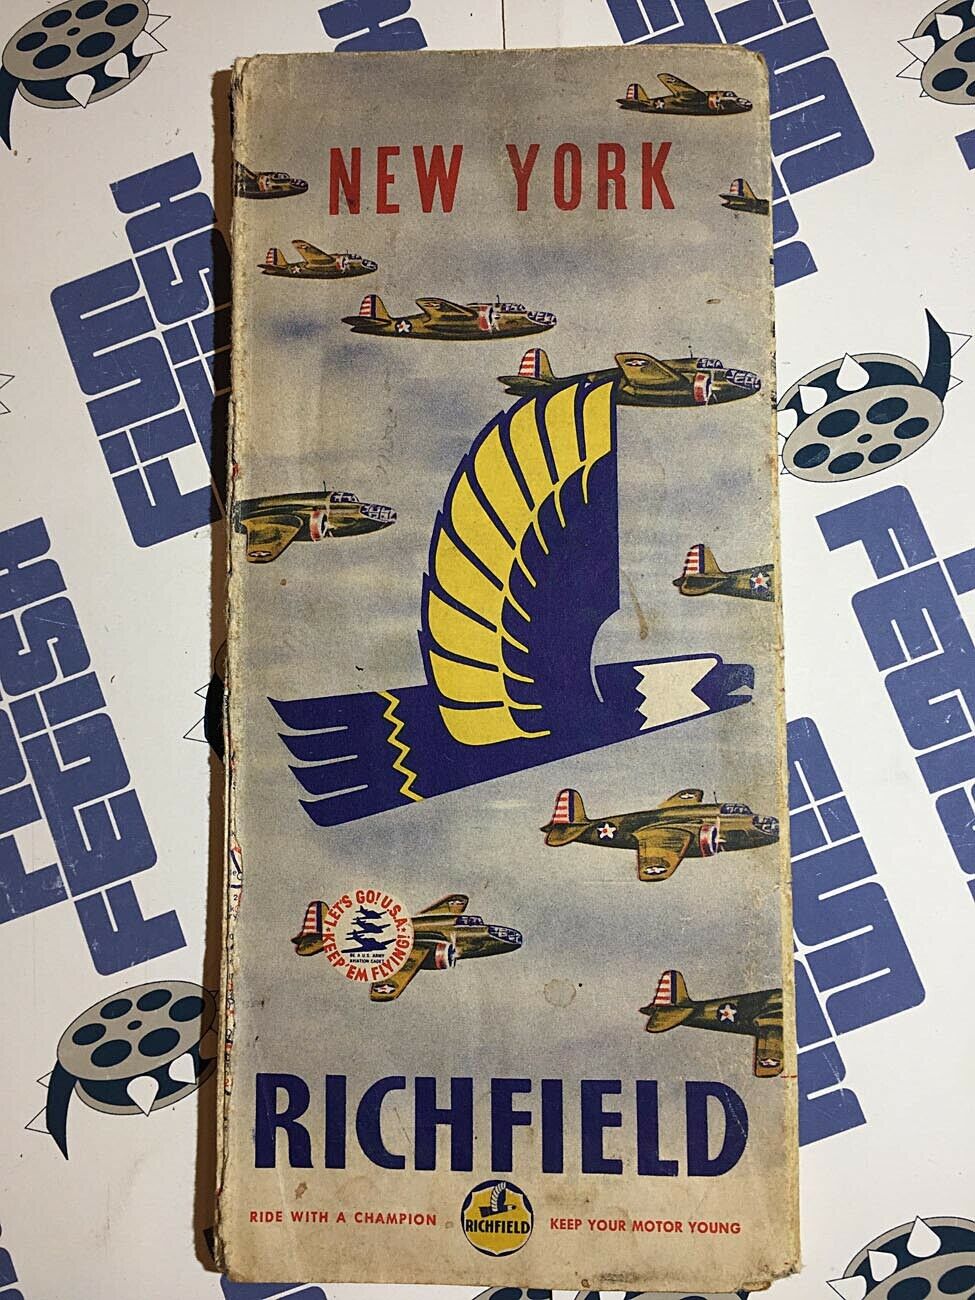 Richfield Oil Corporation-branded Map Of New York State And Northeast